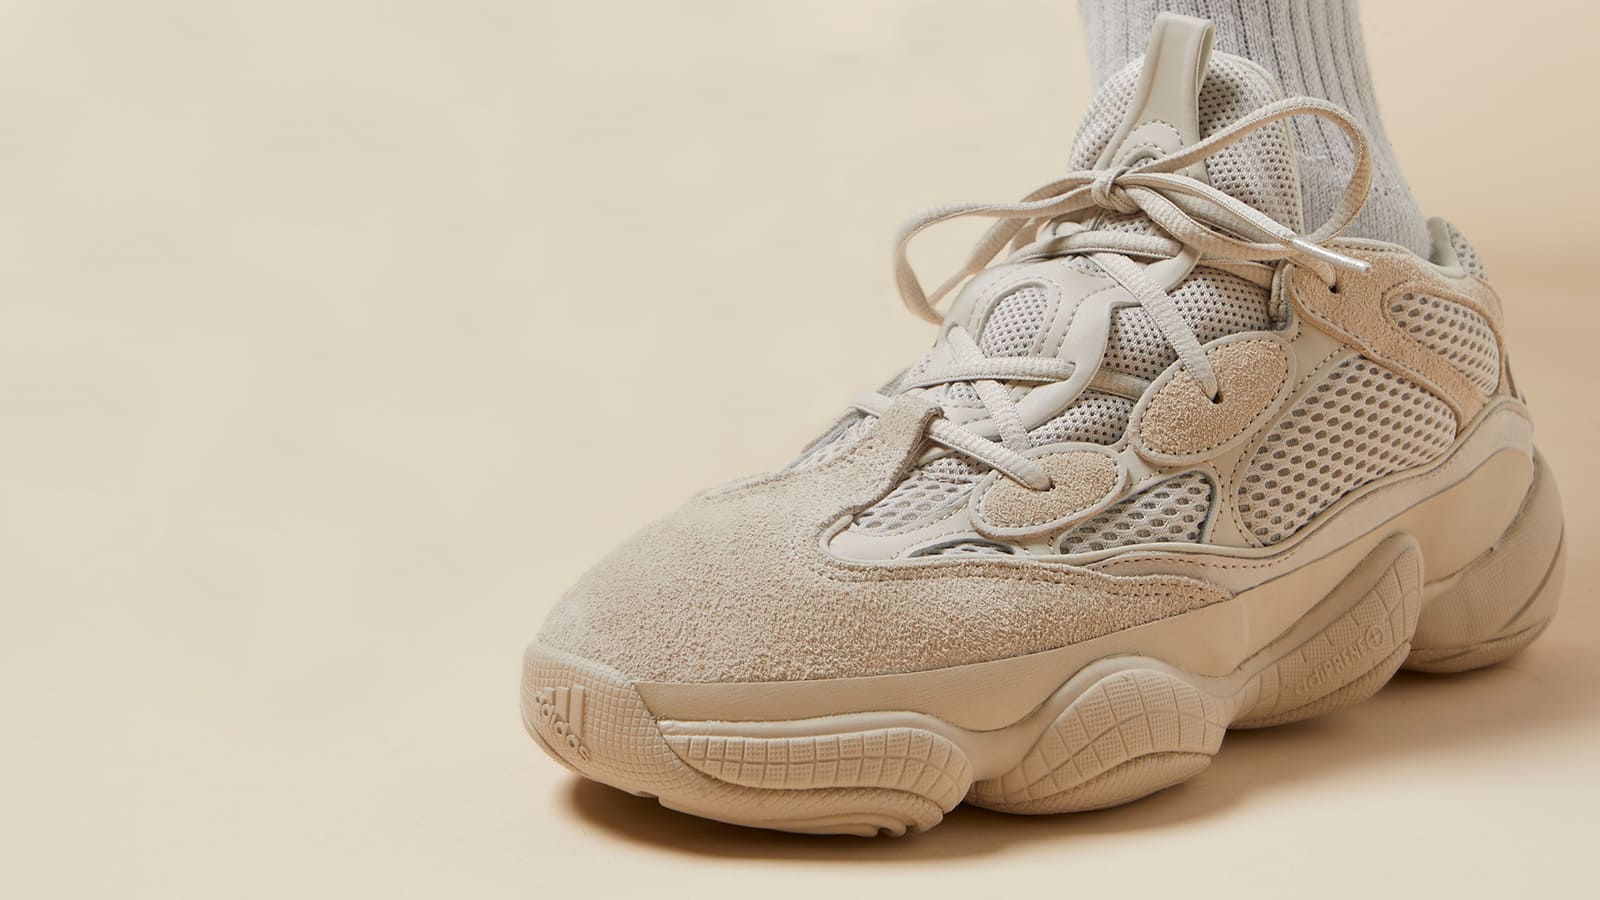 Take a Closer Look at the adidas + KANYE WEST YEEZY 500 'Blush'